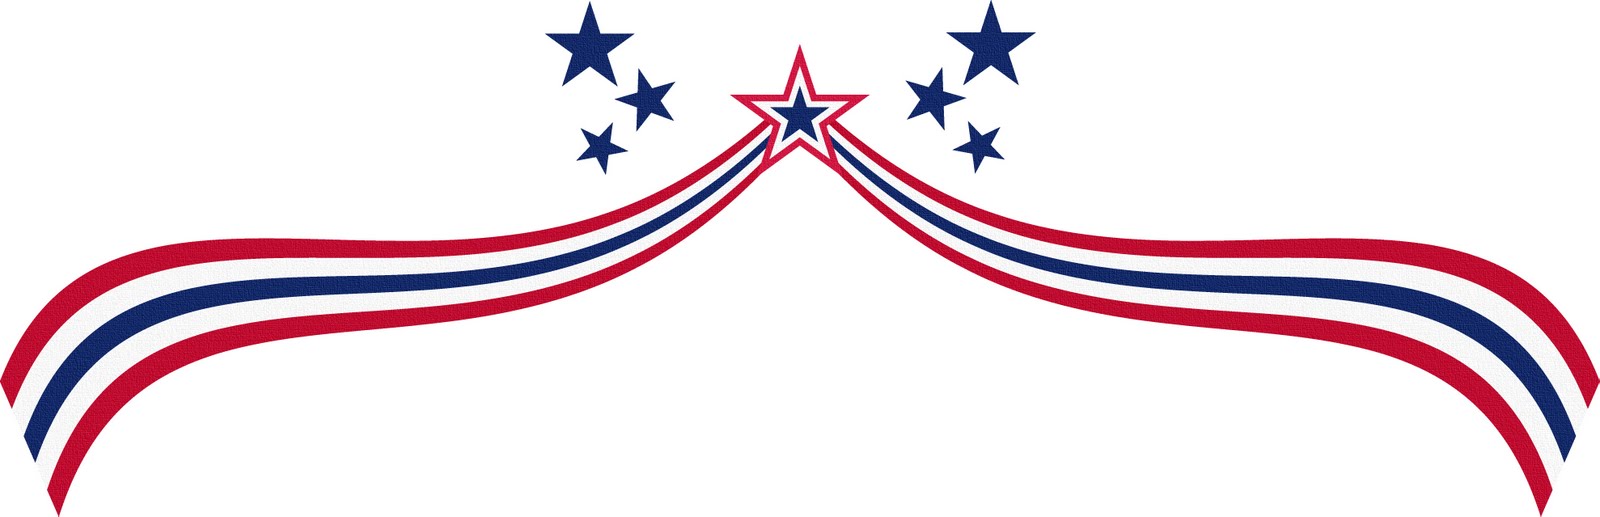 Patriotic american clipart show your pride with americana.